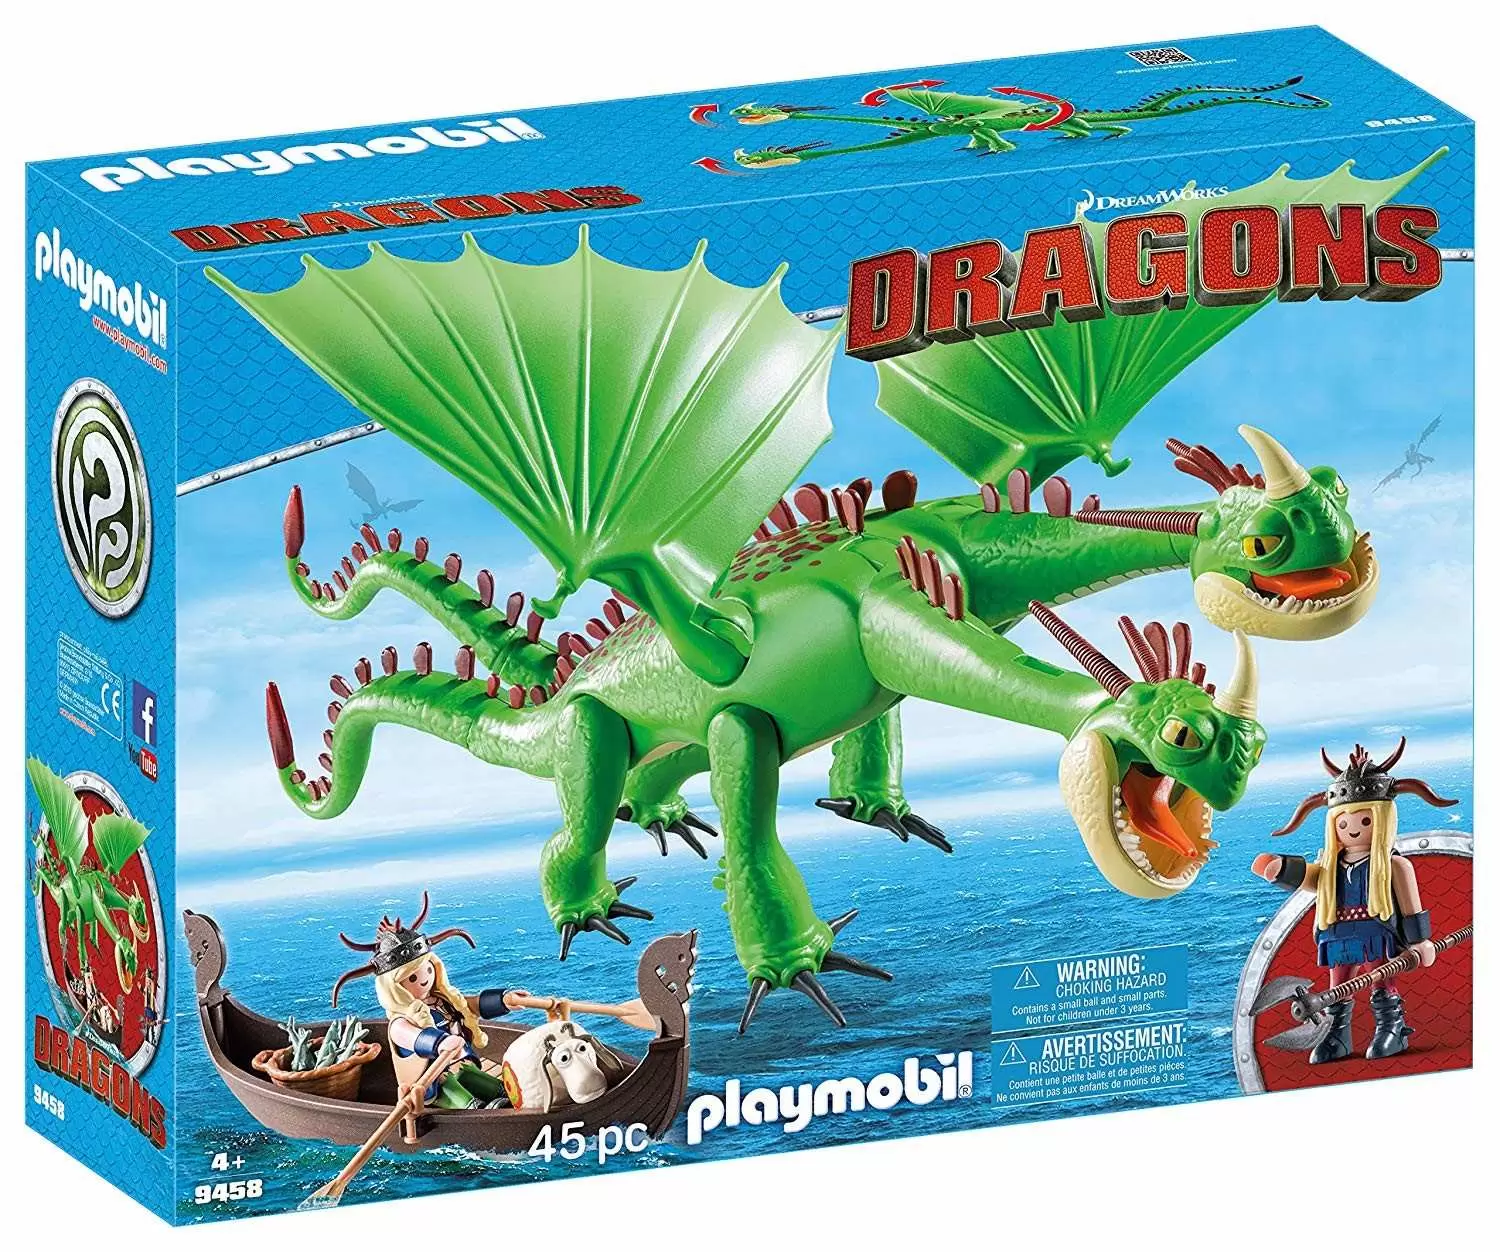 Playmobil Dragons Movie - Ruffnut and Tuffnut with Barf and Belch